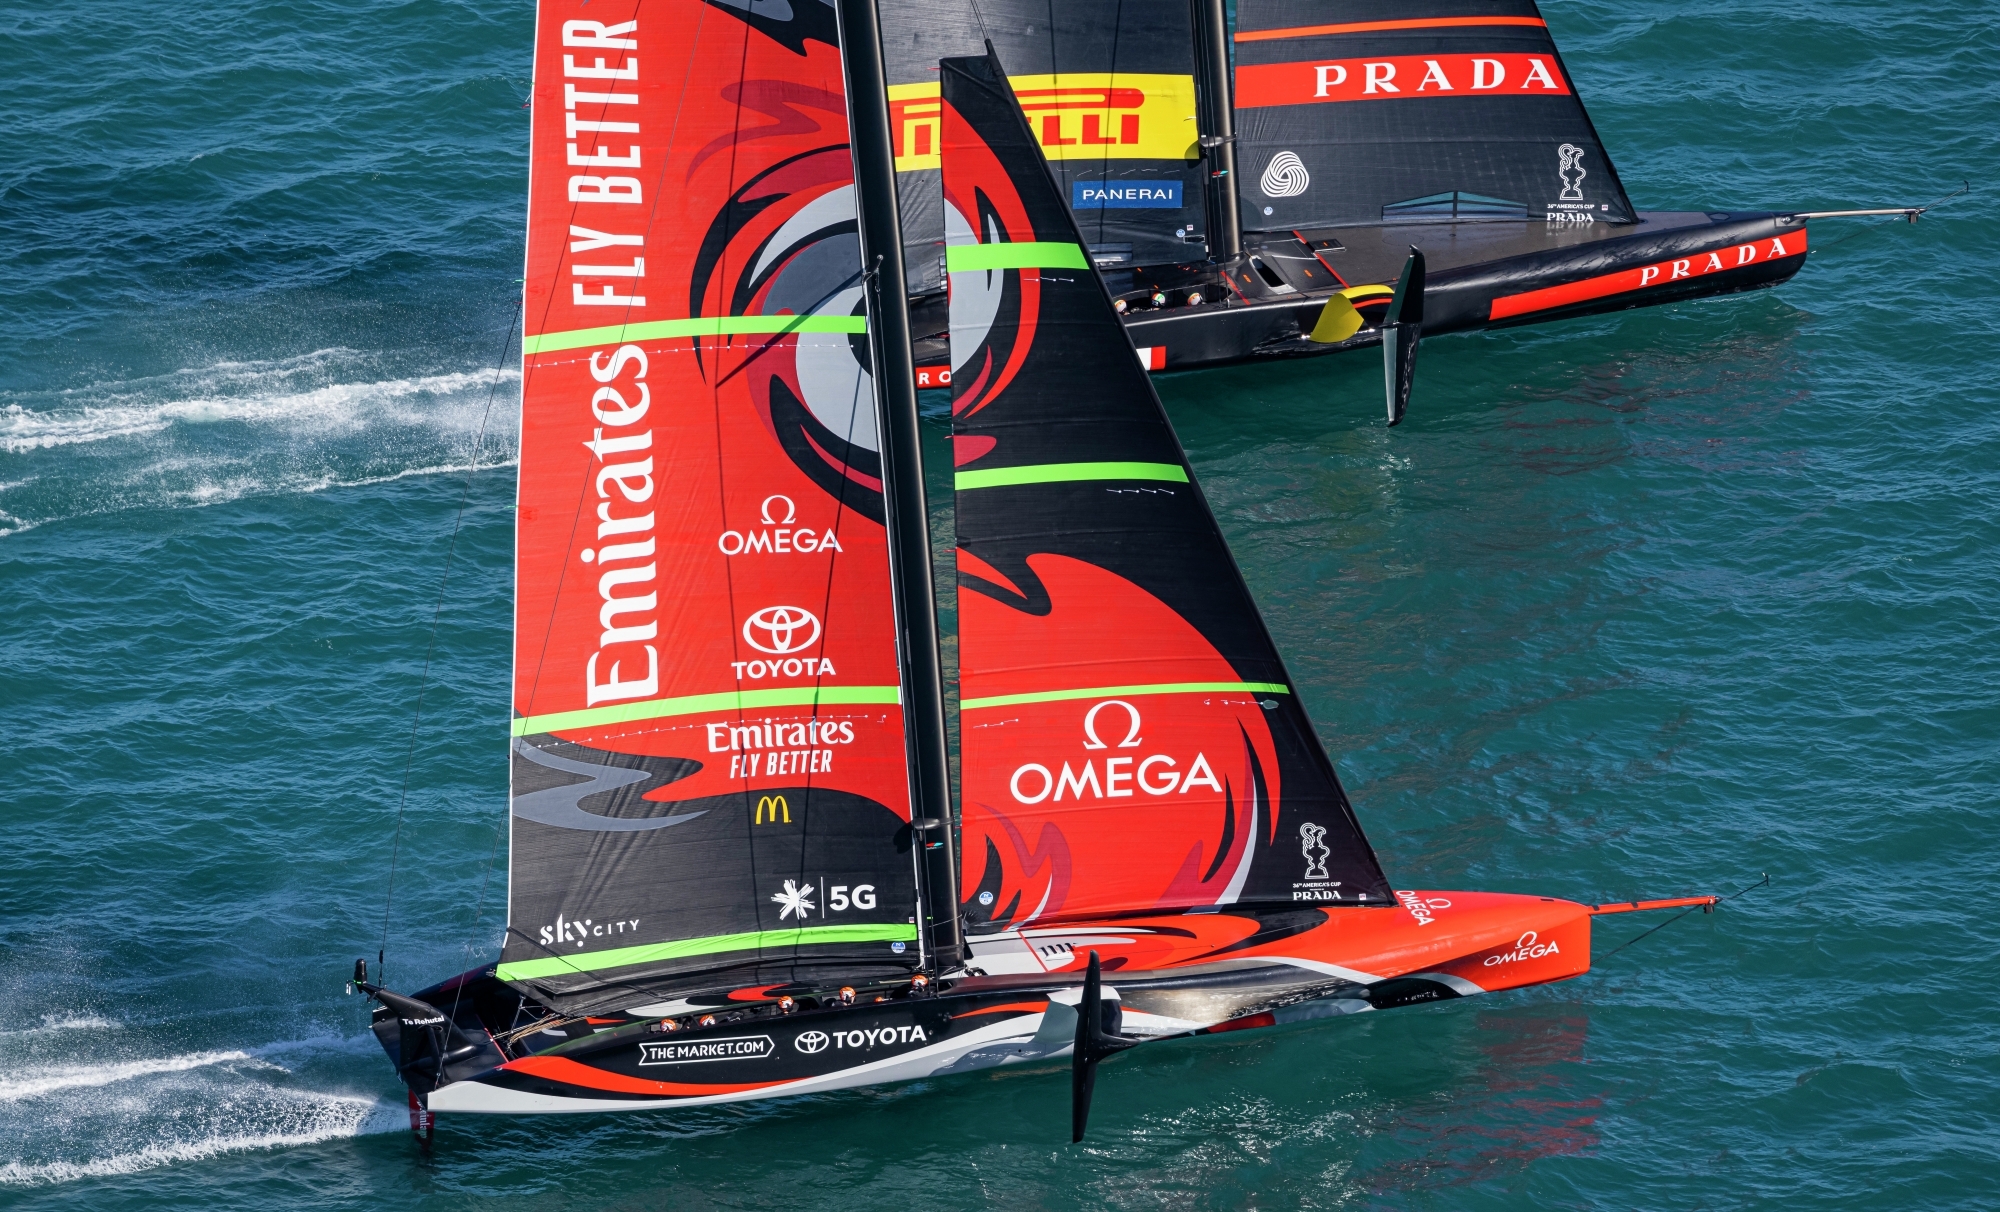  America's Cup  Auckland NZL  First races tomorrow